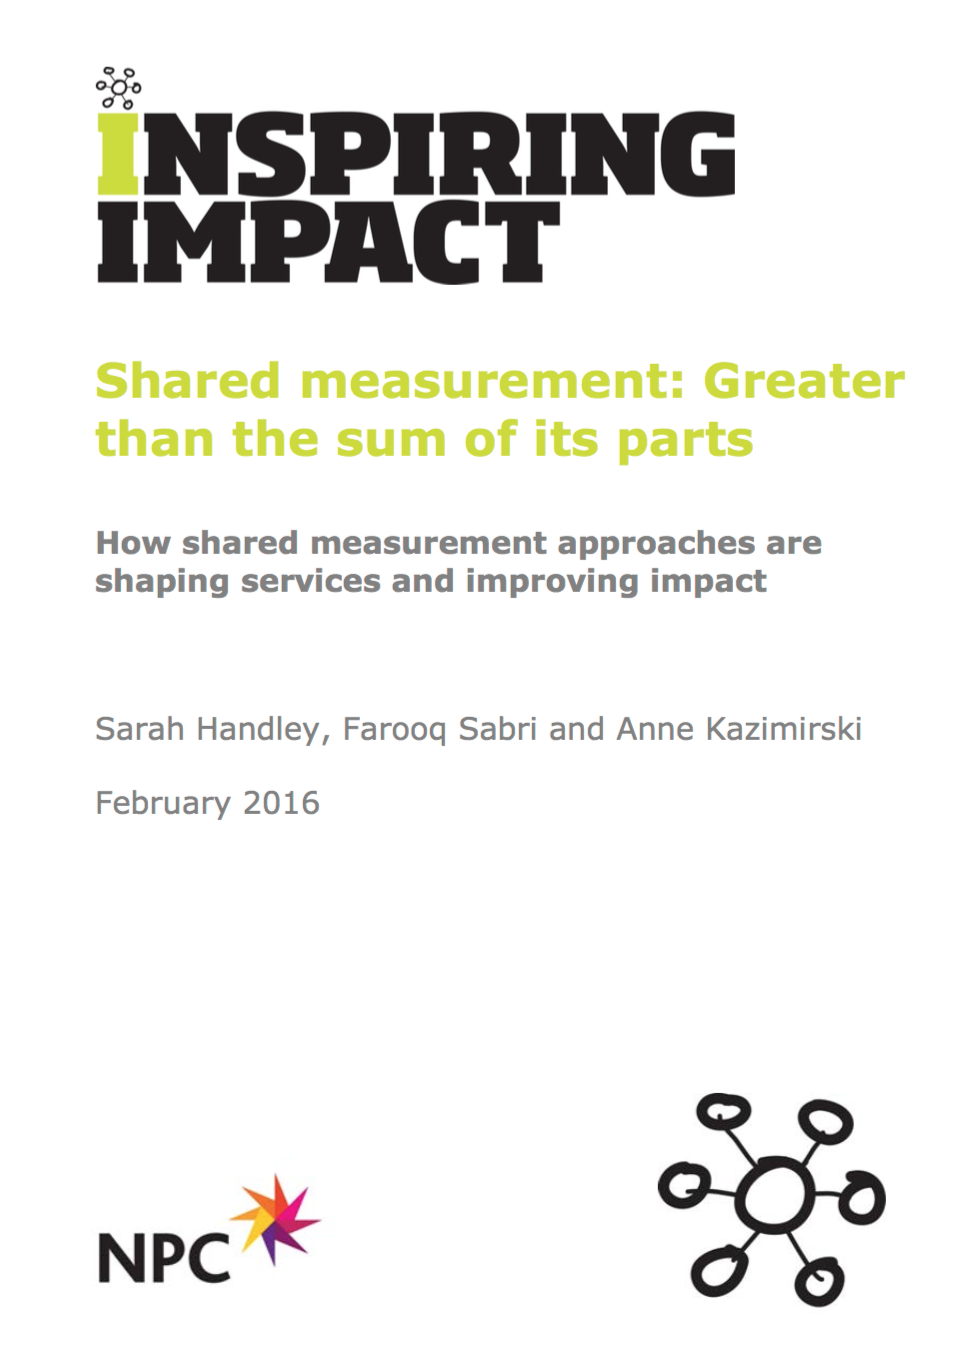 Shared Measurement: Greater than the Sum of its parts